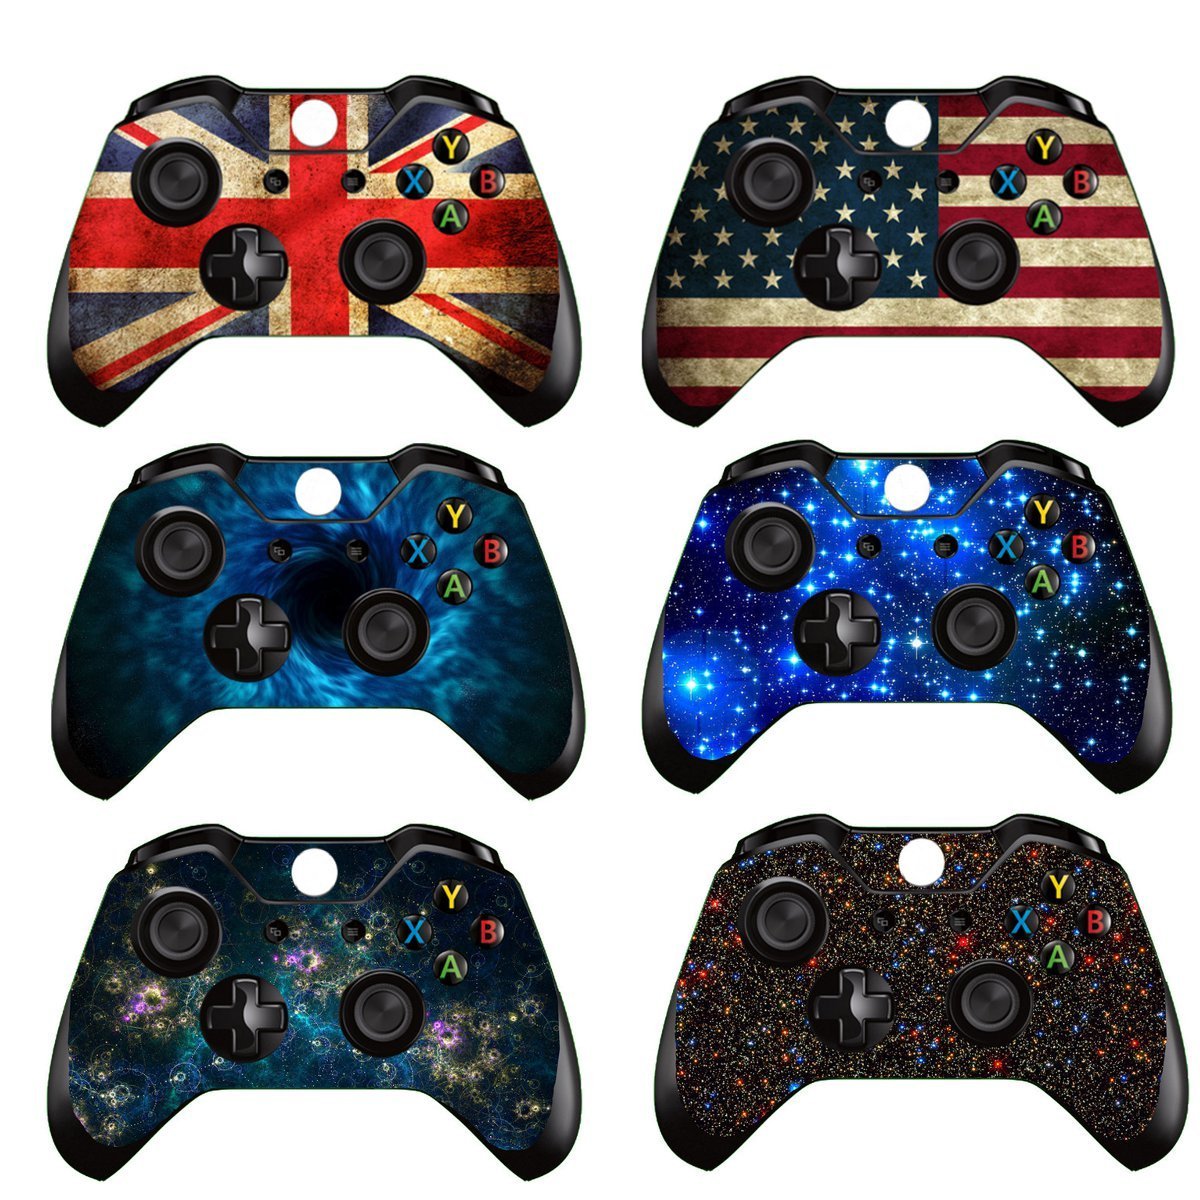 Skin Decal Sticker Cover Wrap Protector For Microsoft Xbox One Gamepad Game Controller 2